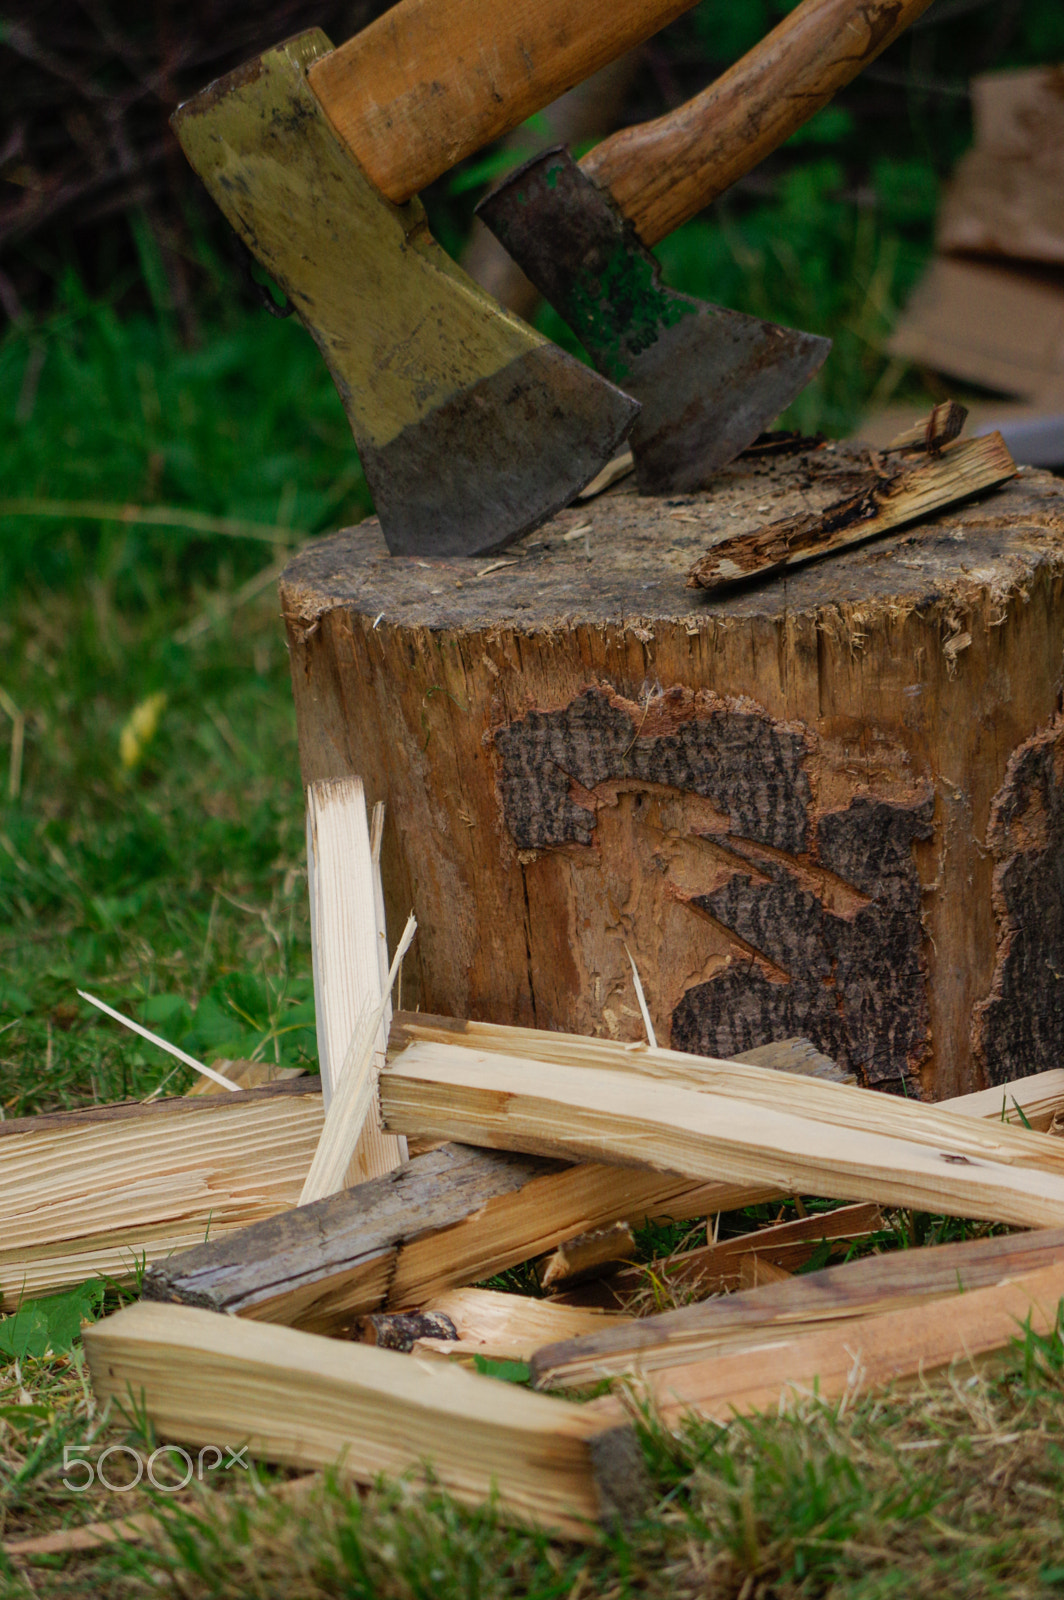 Pentax K-3 sample photo. Two ax in stump with wood crest on a background of green grass and firewood photography